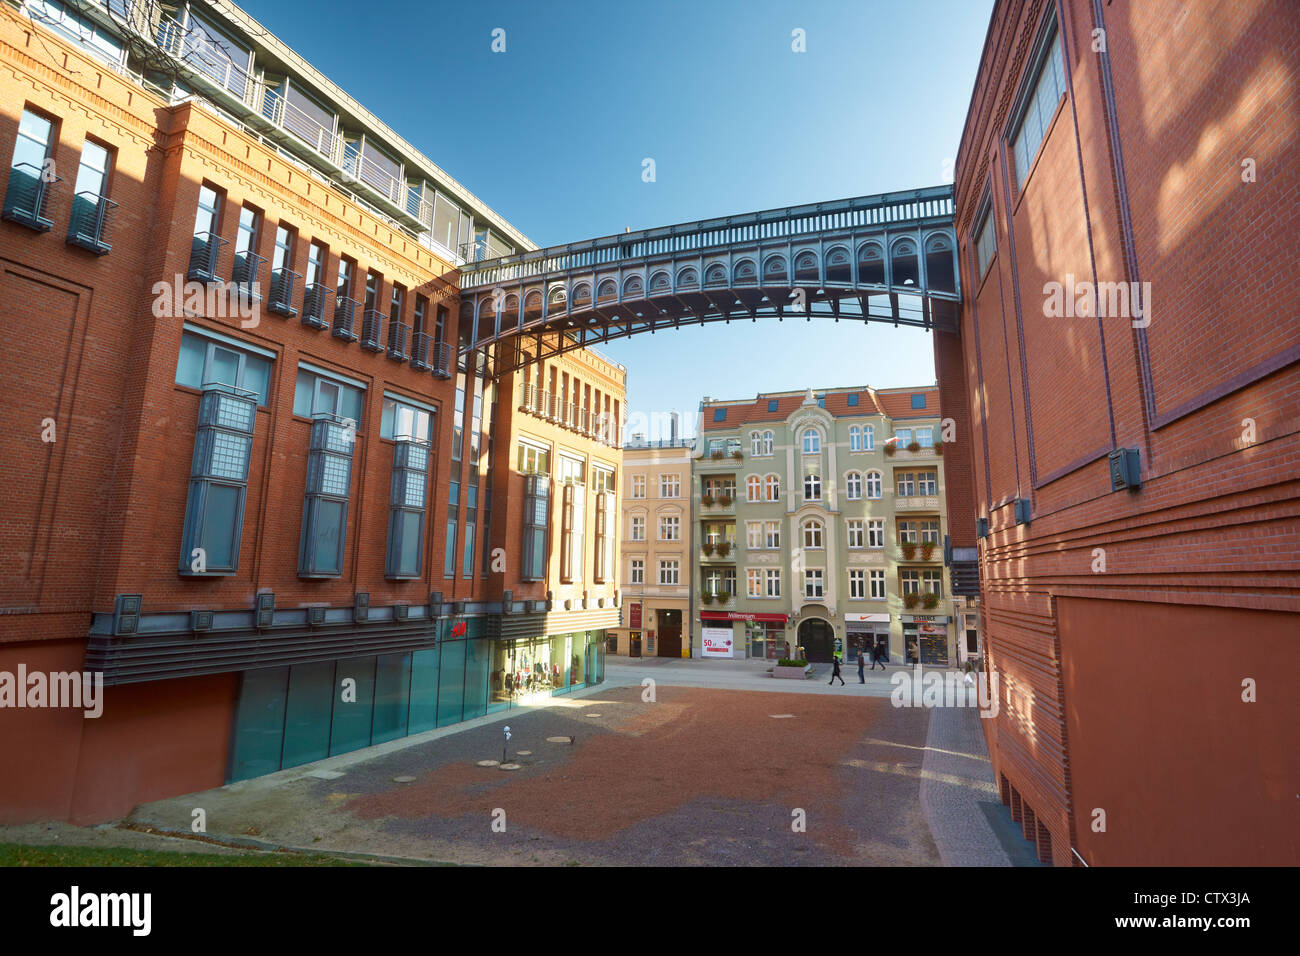 Shopping, Arts and Business Center “Stary Browar” Poznan, Poland, Europe Stock Photo